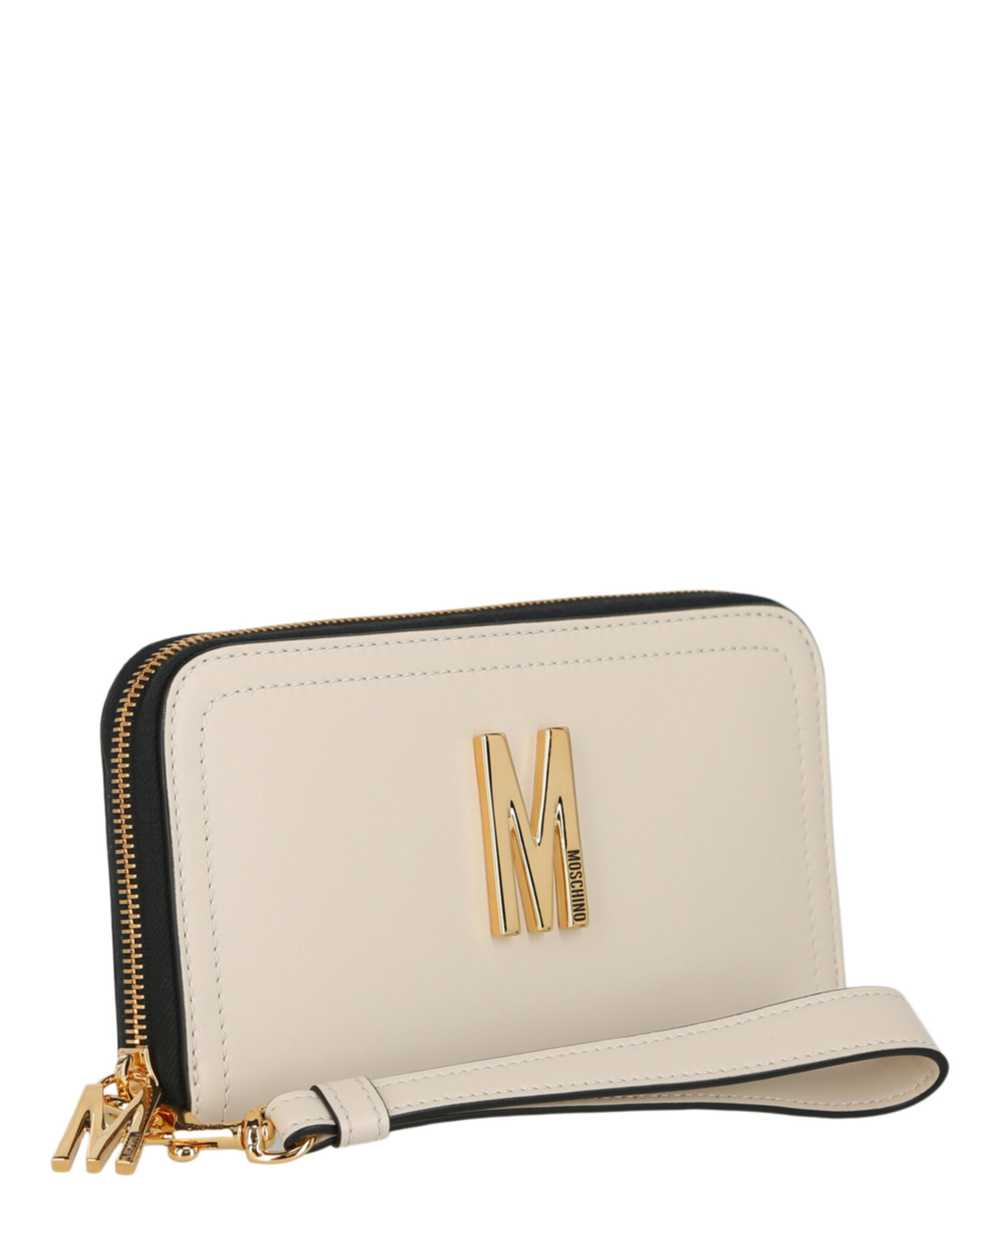 Moschino Womens M Logo Leather Wallet - image 2